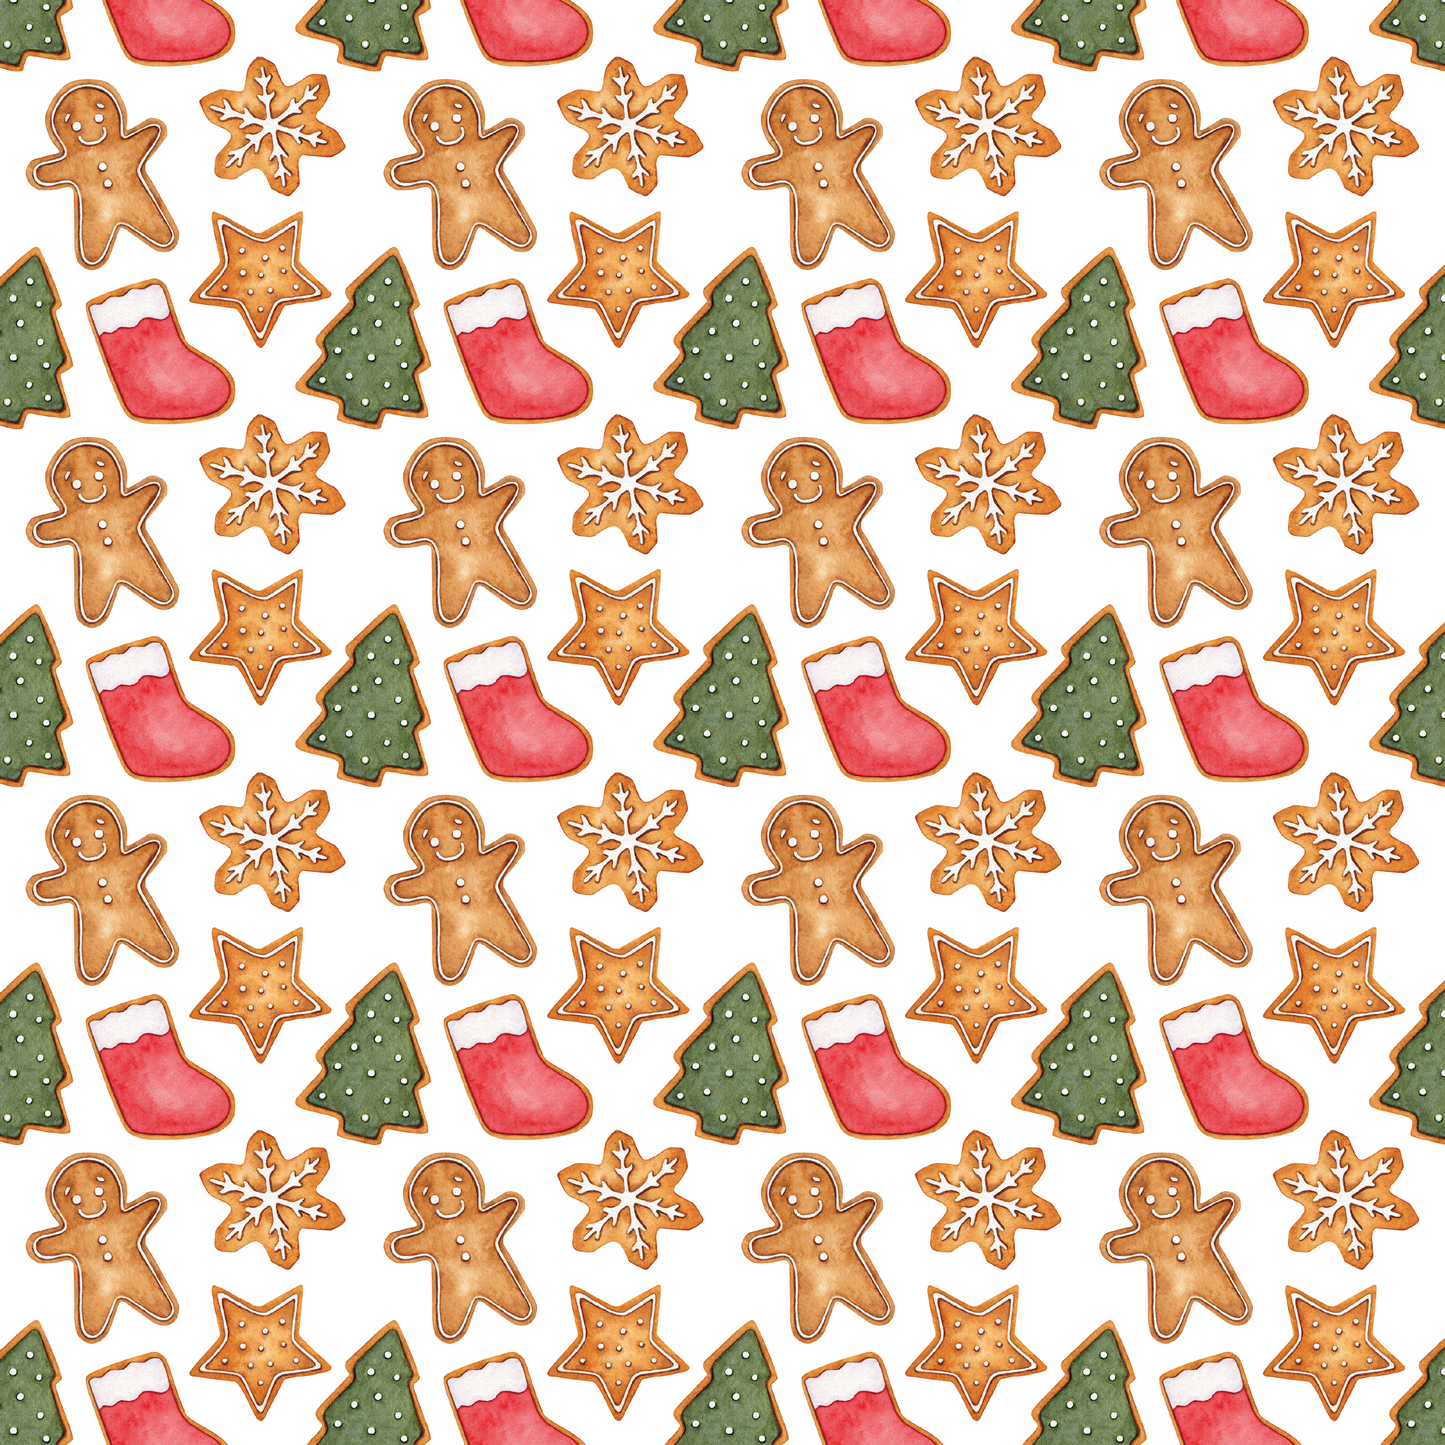 Christmas Sweets - Gingerbread 003